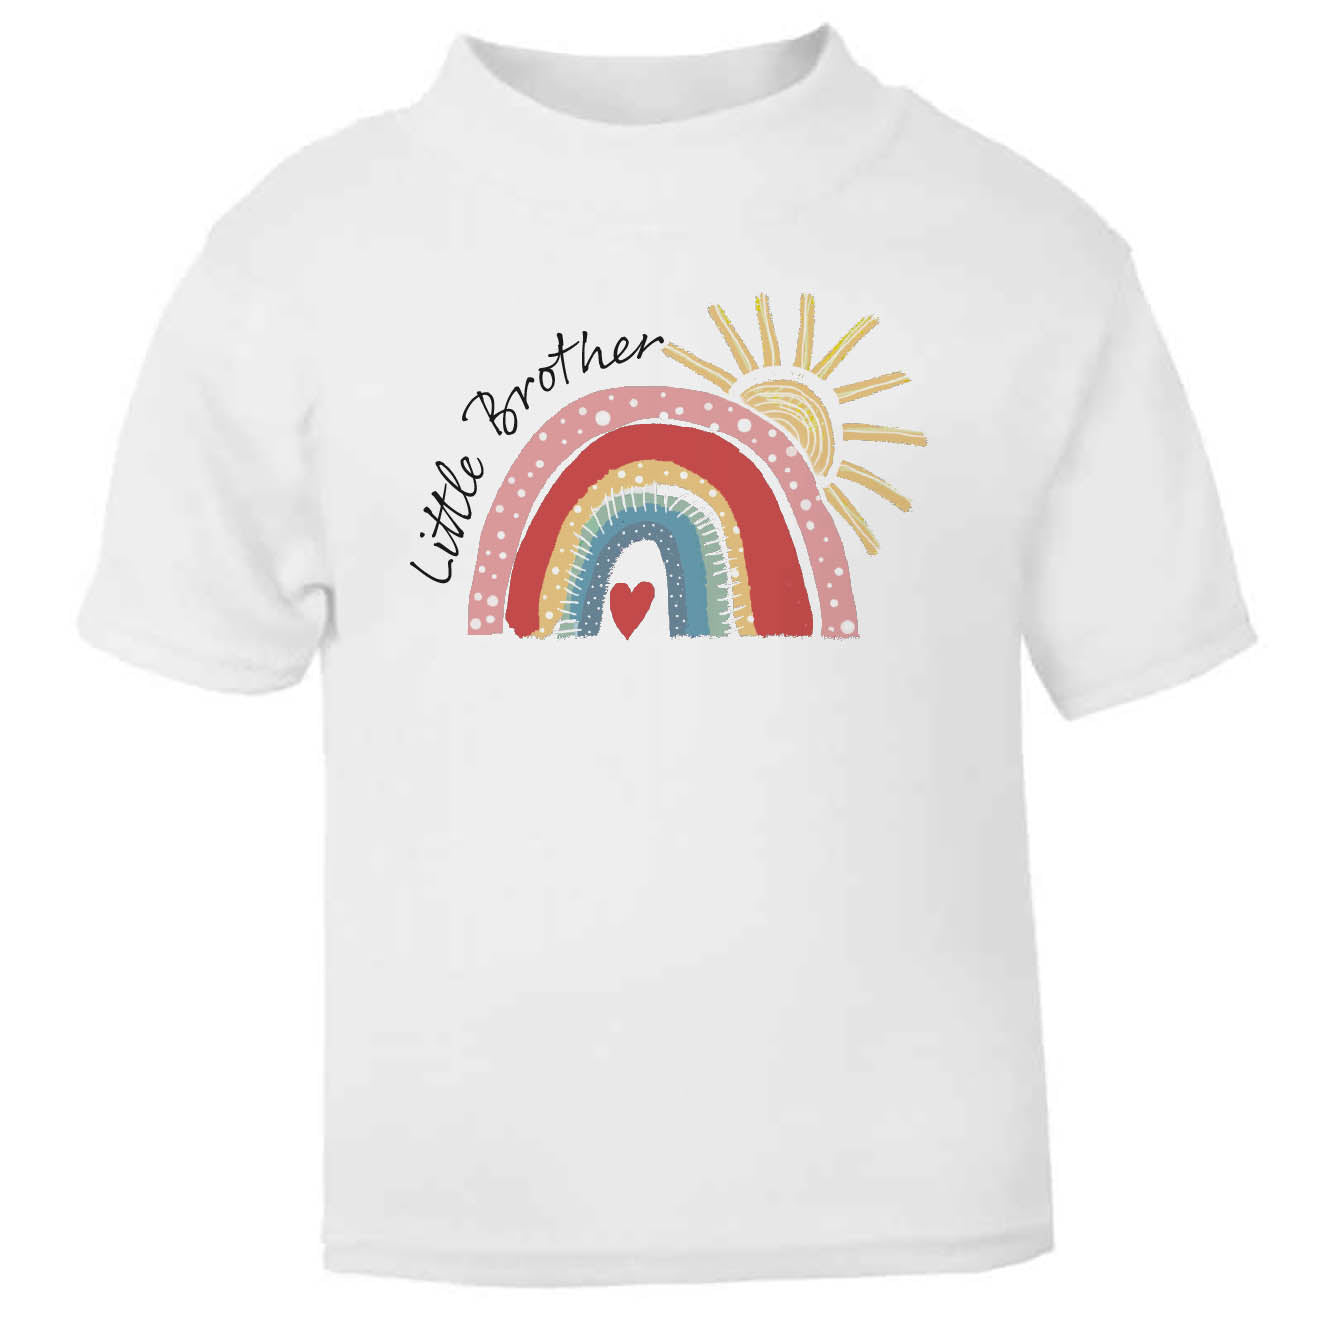 Little Brother Rainbow Toddler T Shirt